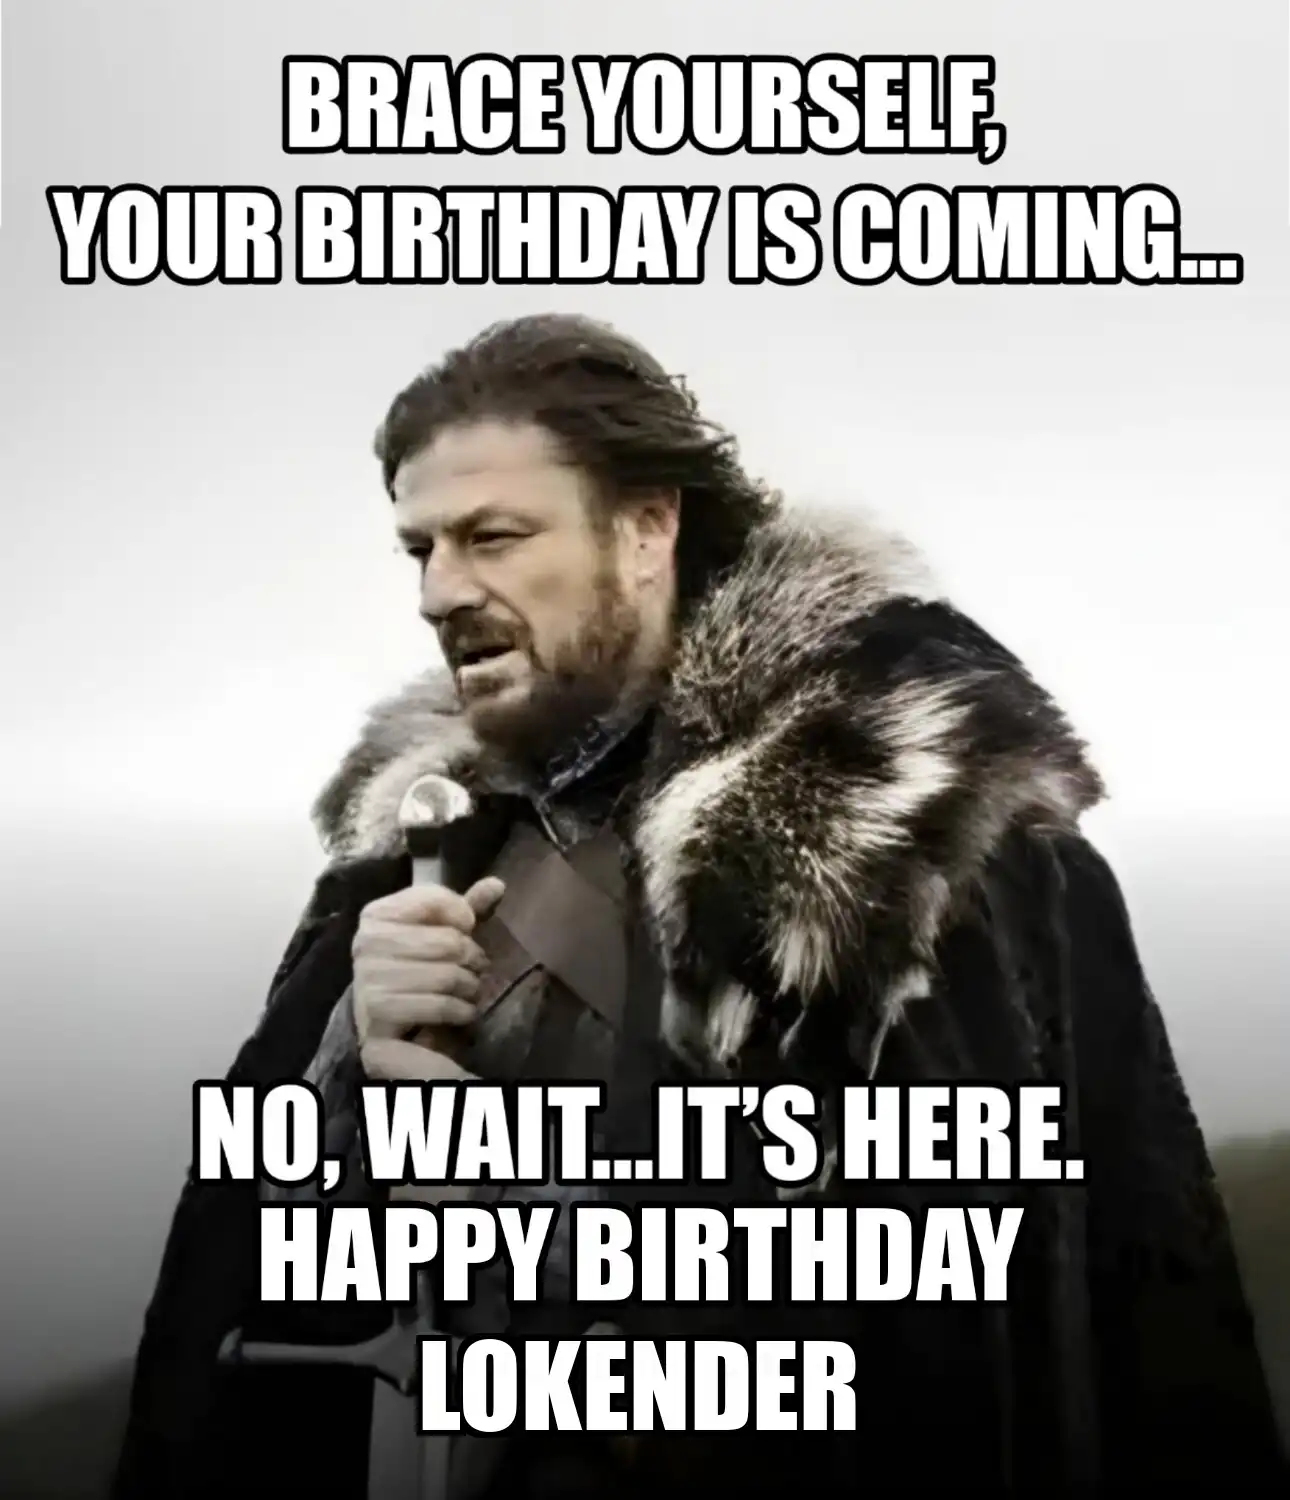 Happy Birthday Lokender Brace Yourself Your Birthday Is Coming Meme